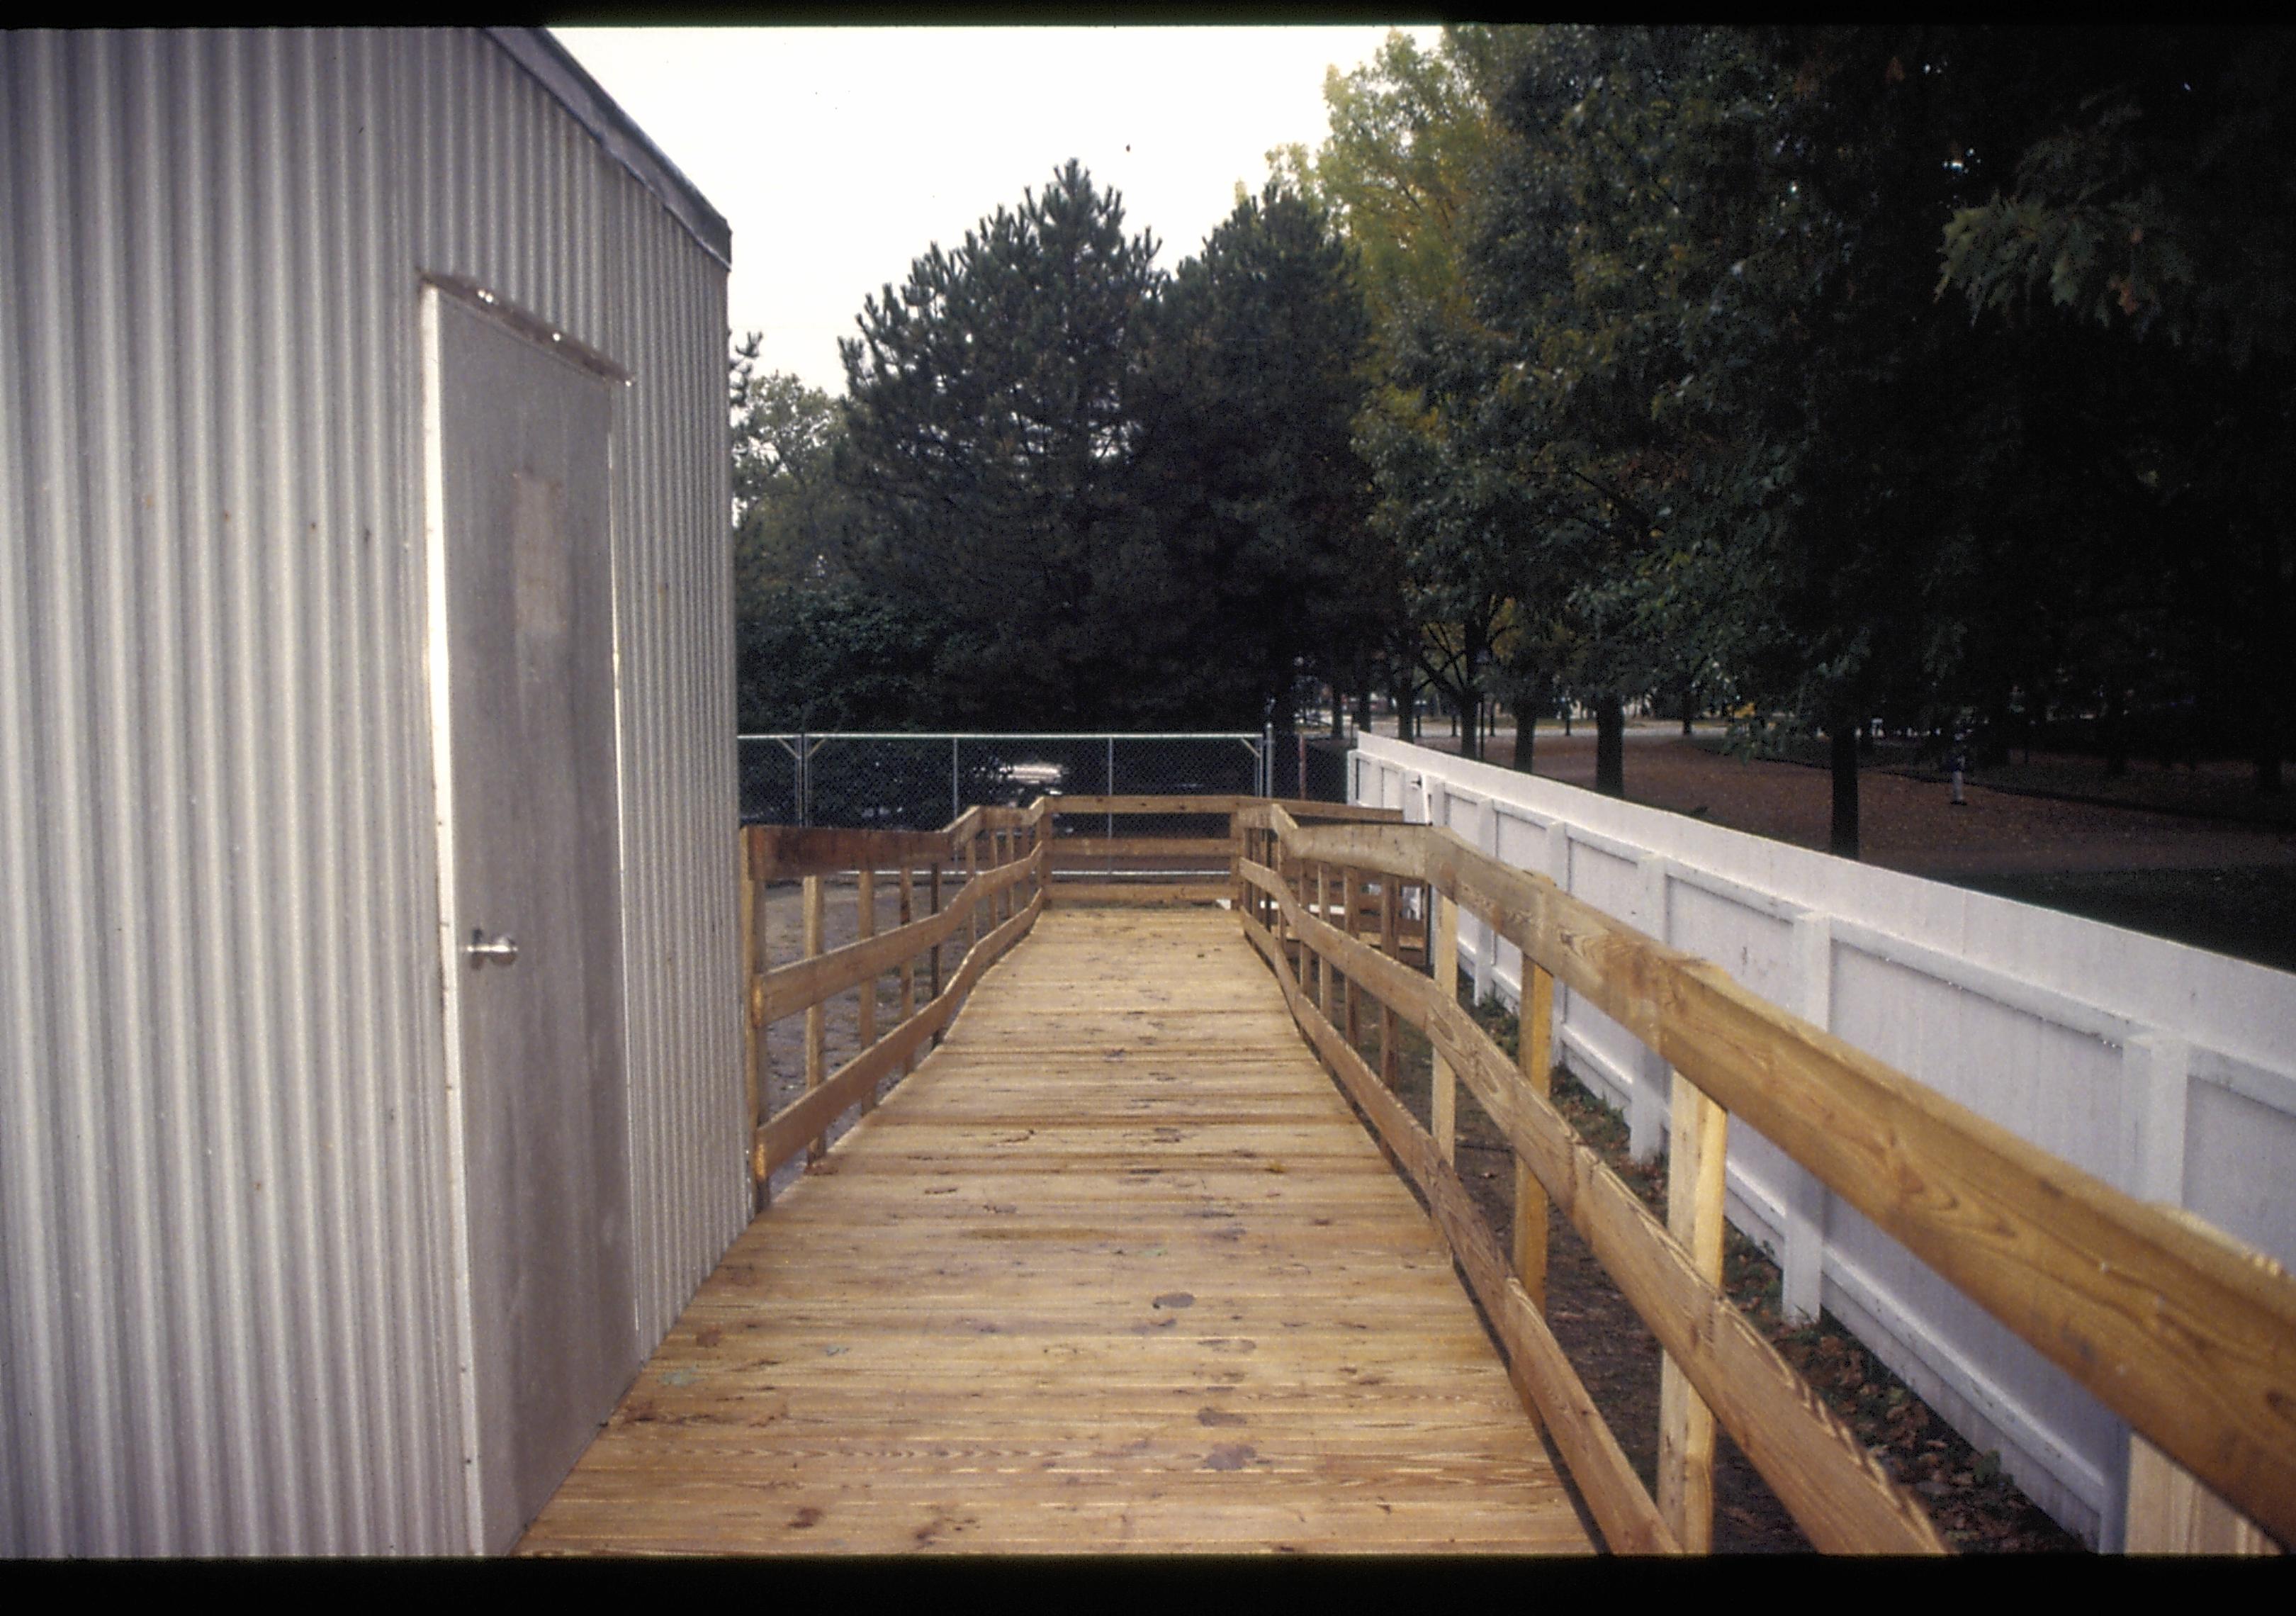 restroom trailer access ramp Lincoln Home NHS- Visitor Center remodel,  Roll 1999-11 exp 9 Visitor Center, Corneau, restroom, temporary